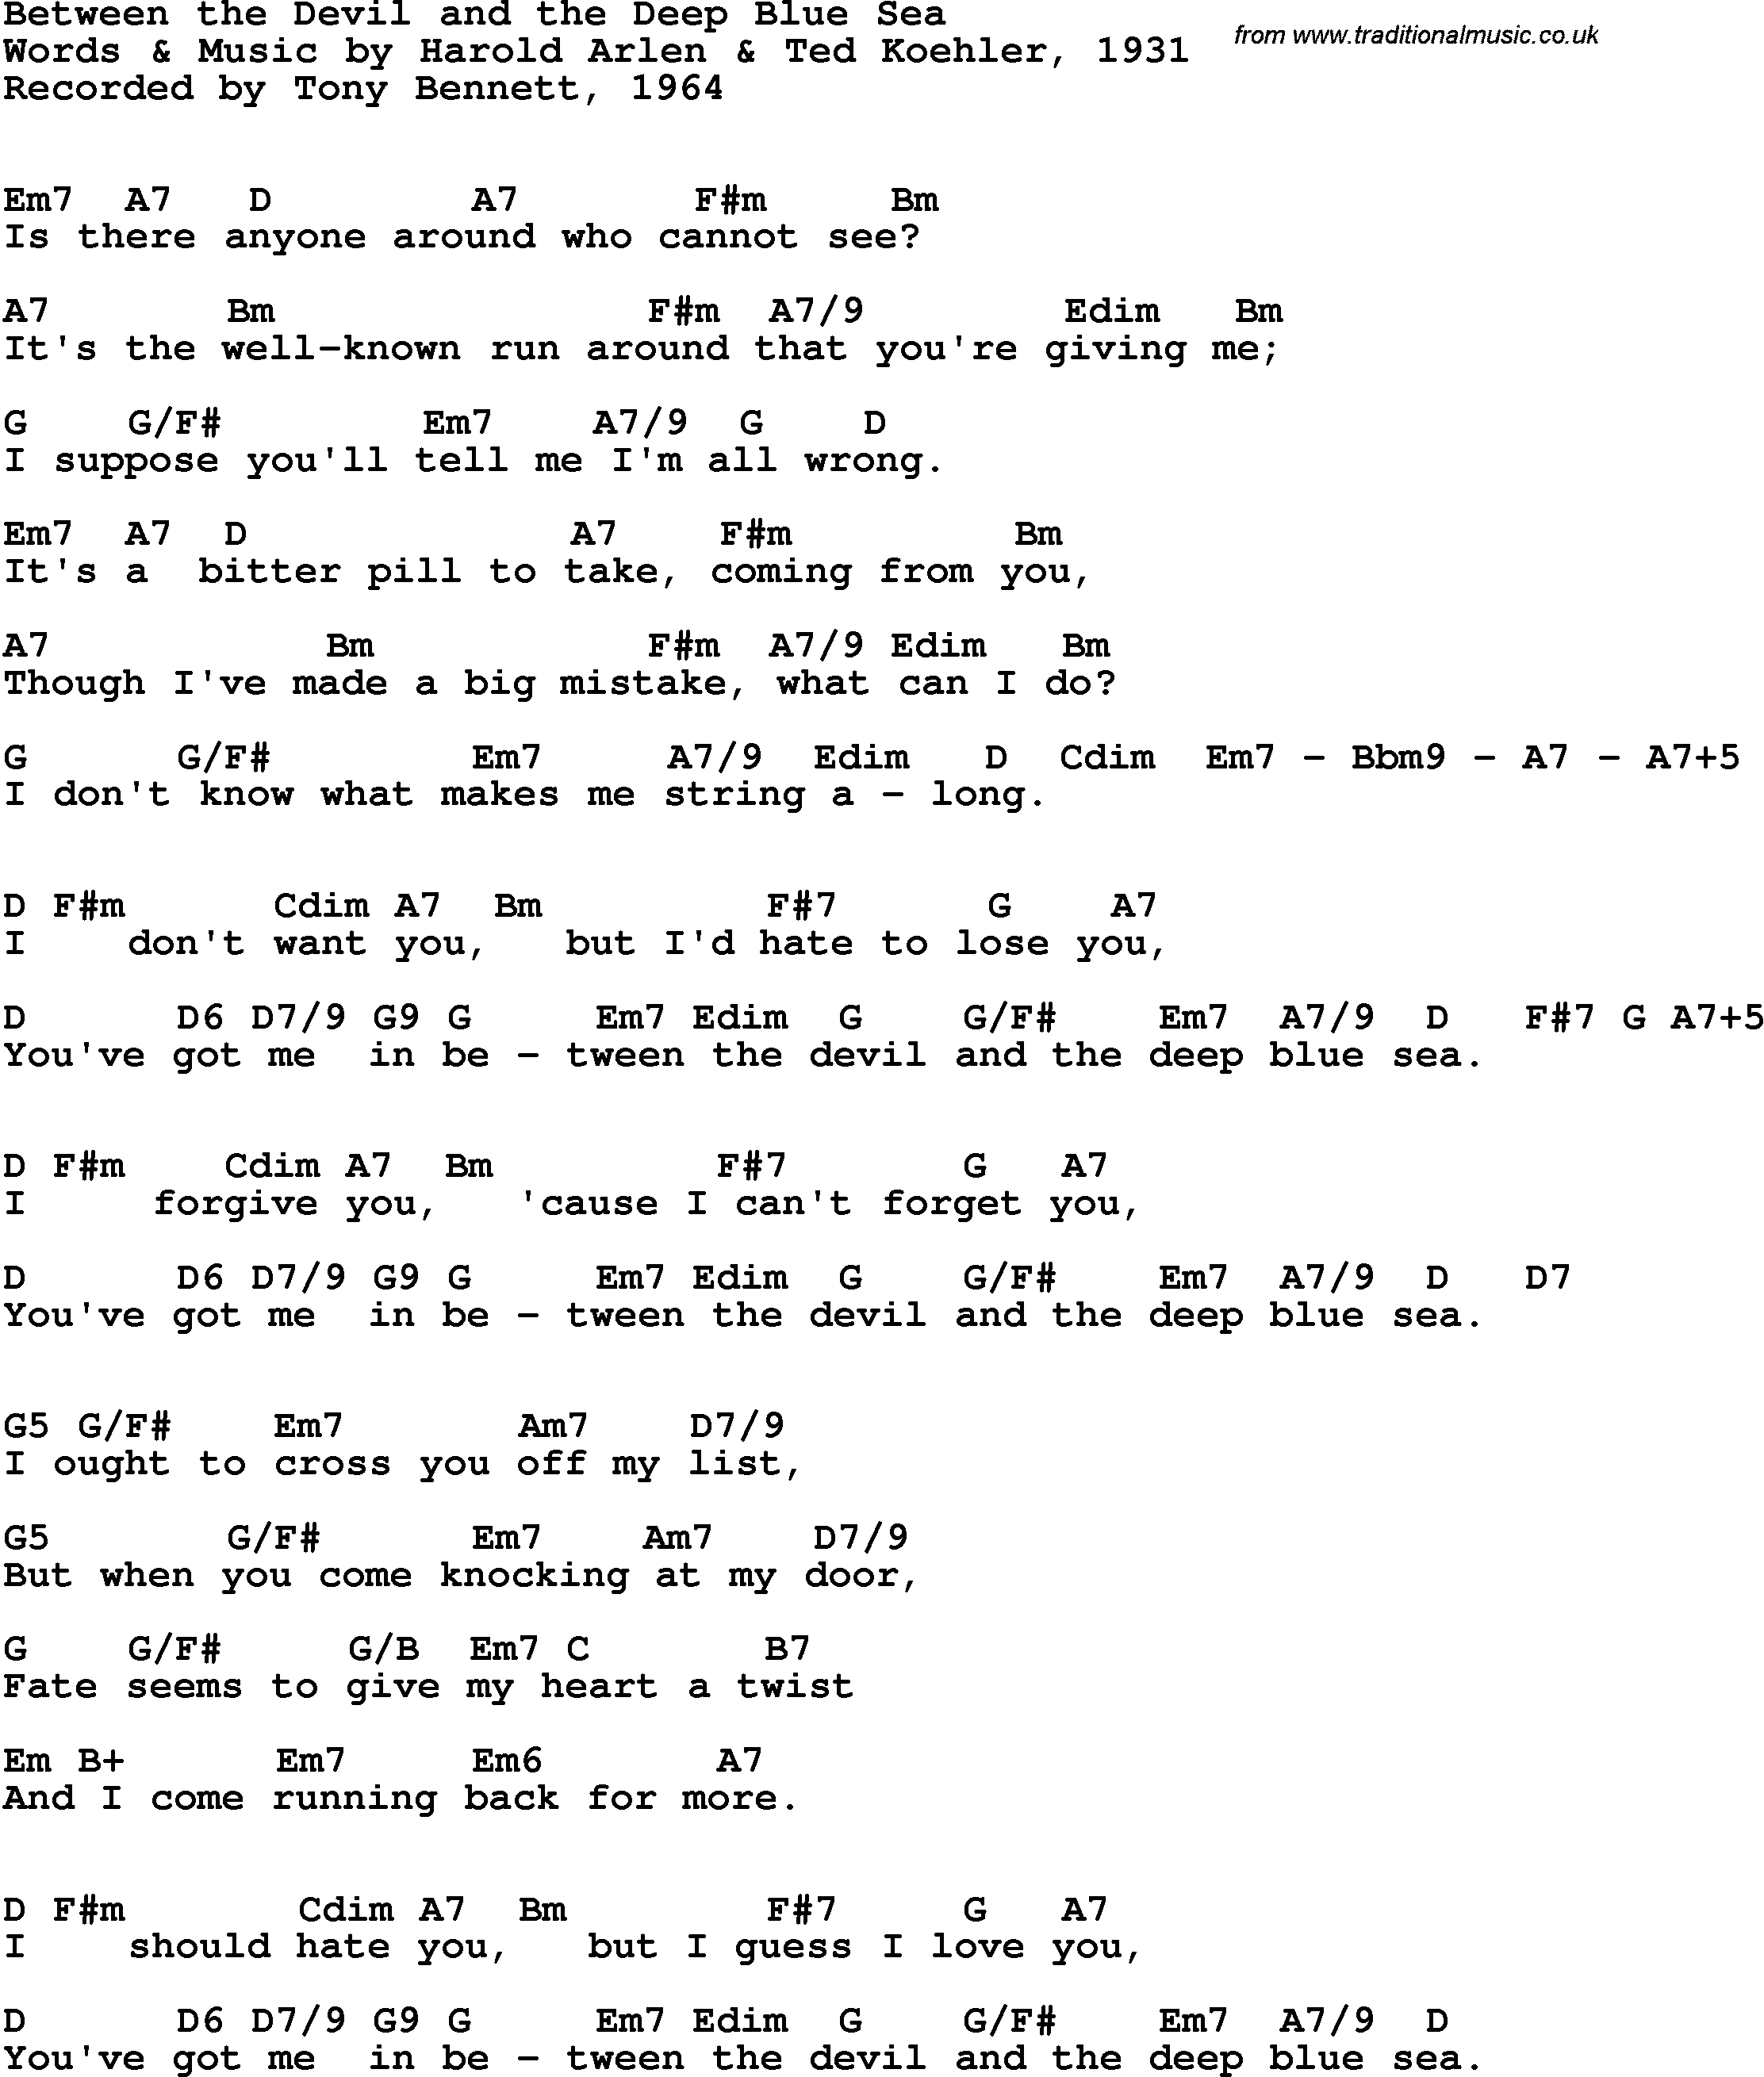 Song Lyrics with guitar chords for Between The Devil And The Deep Blue Sea - Tony Bennett, 1964